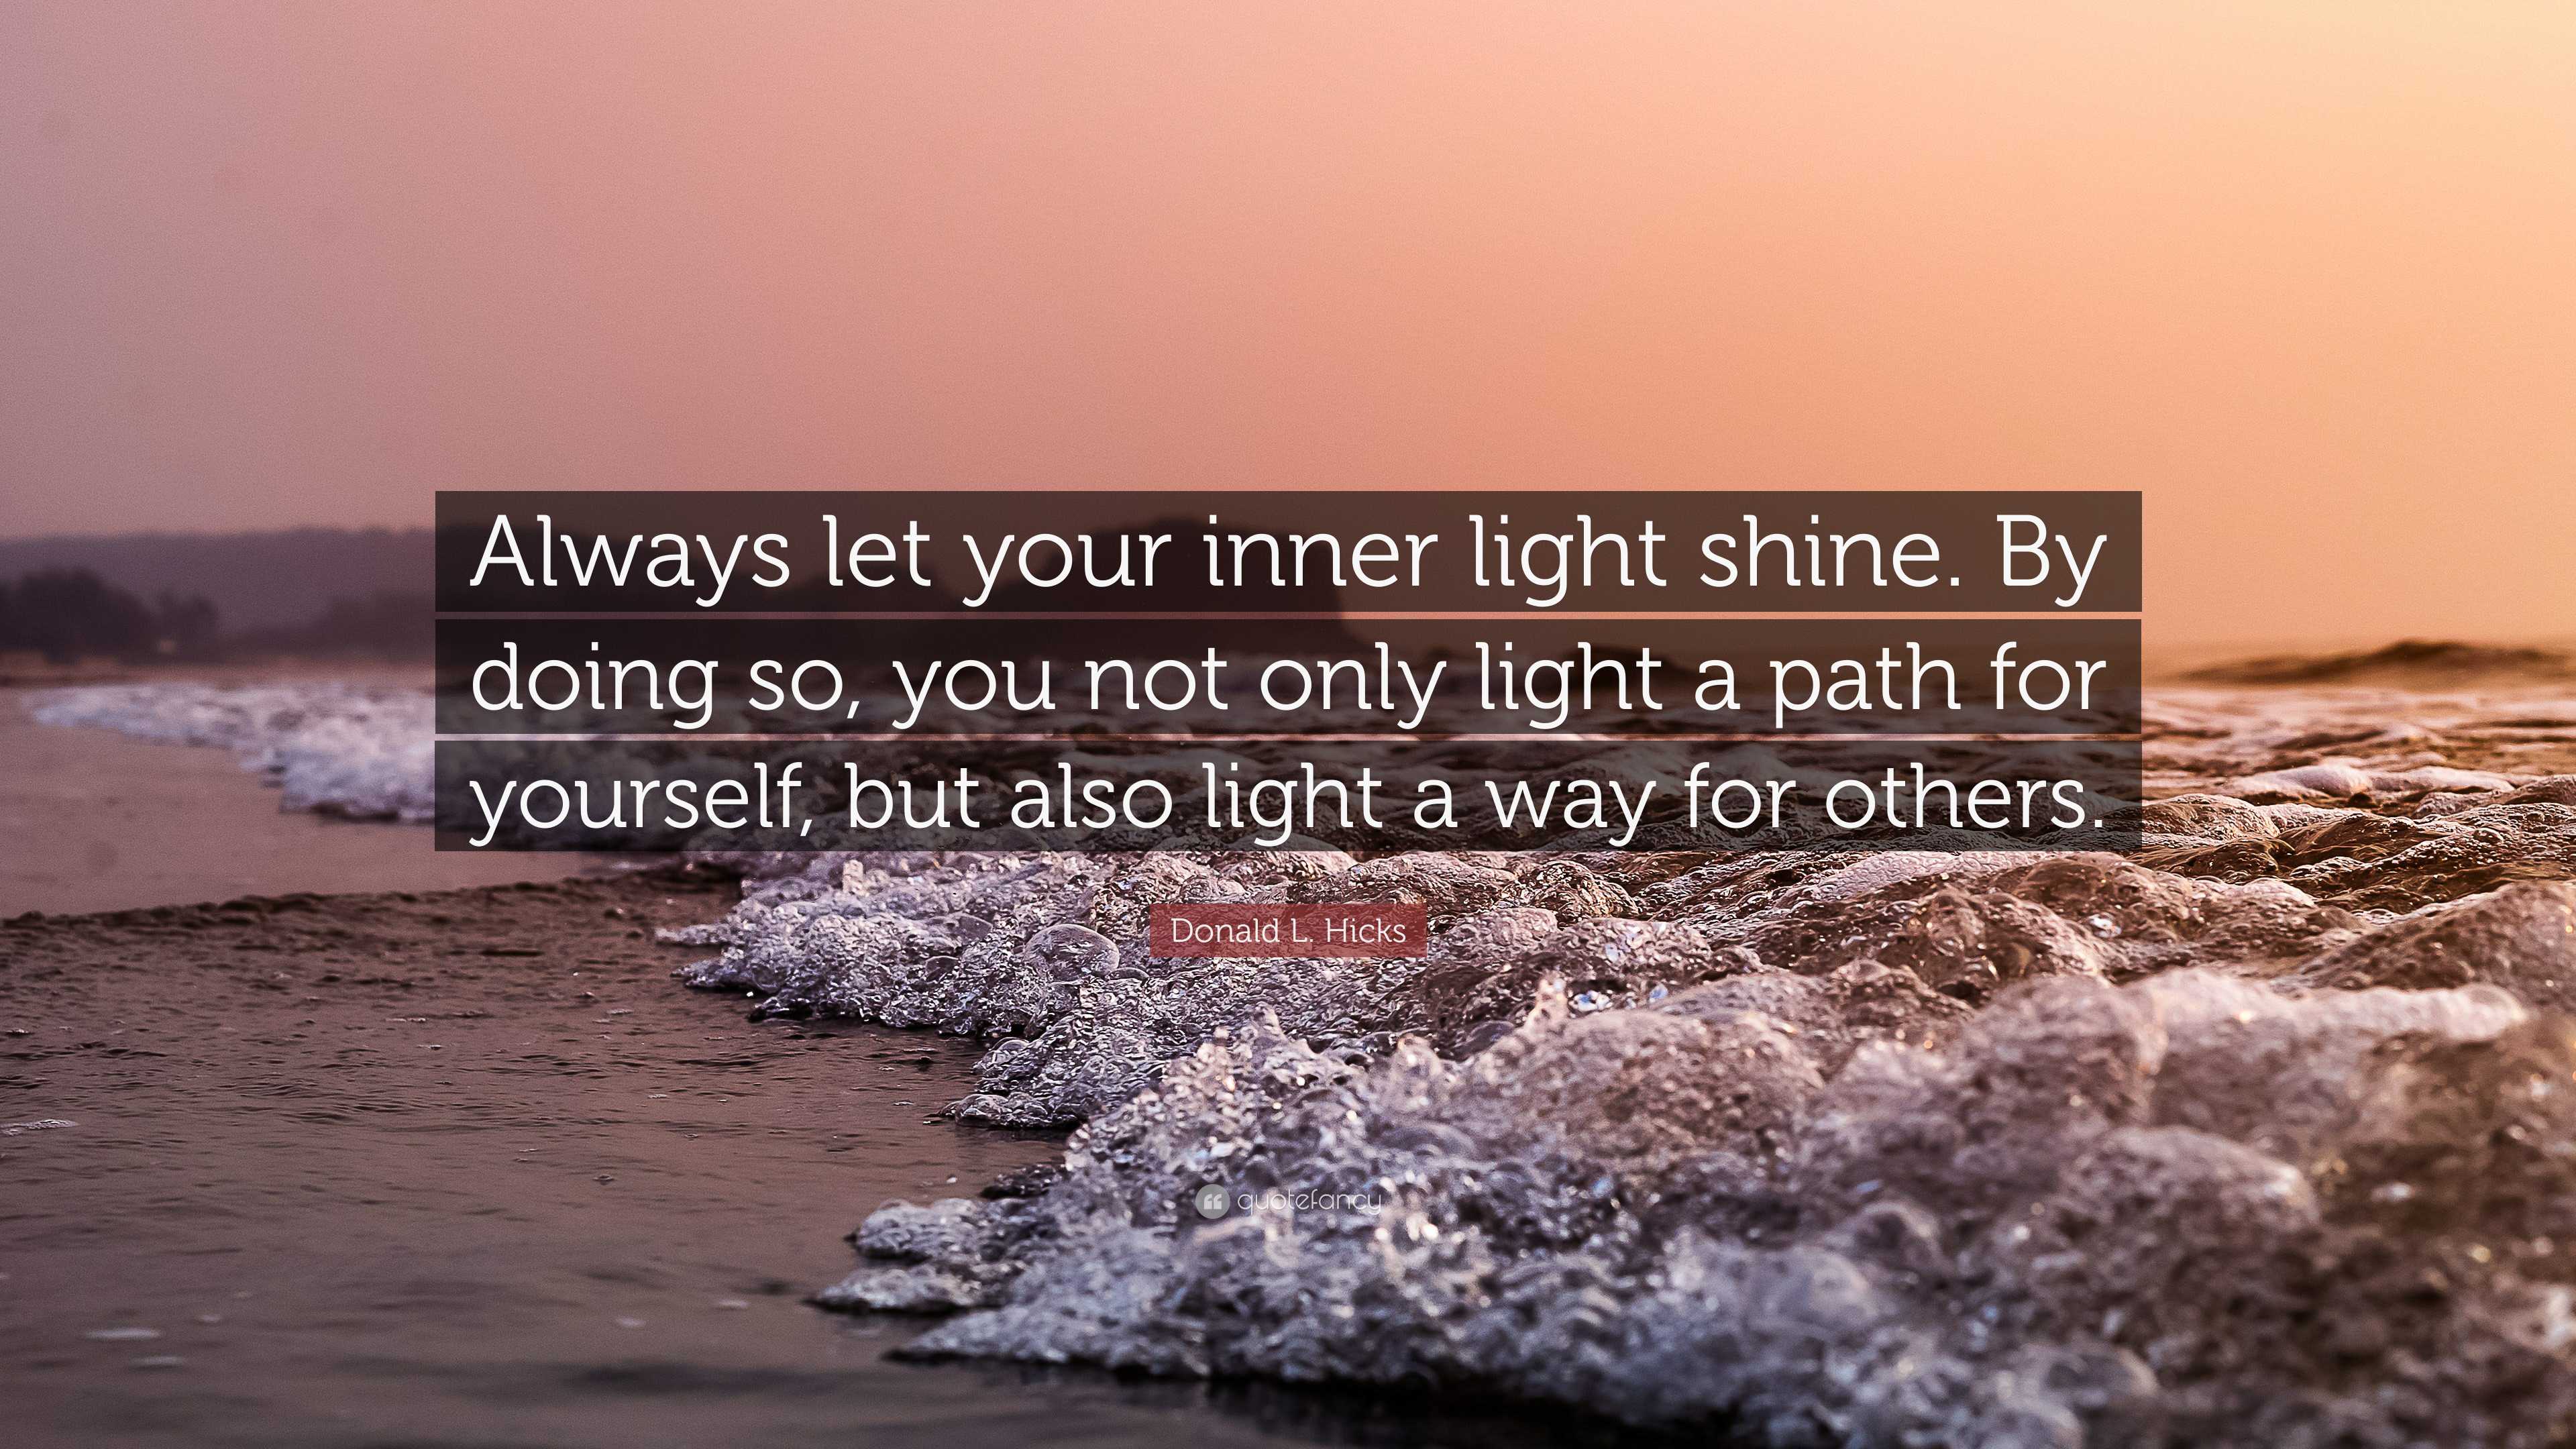 Donald L. Hicks Quote: “Always let your inner light shine. By doing so, you  not only